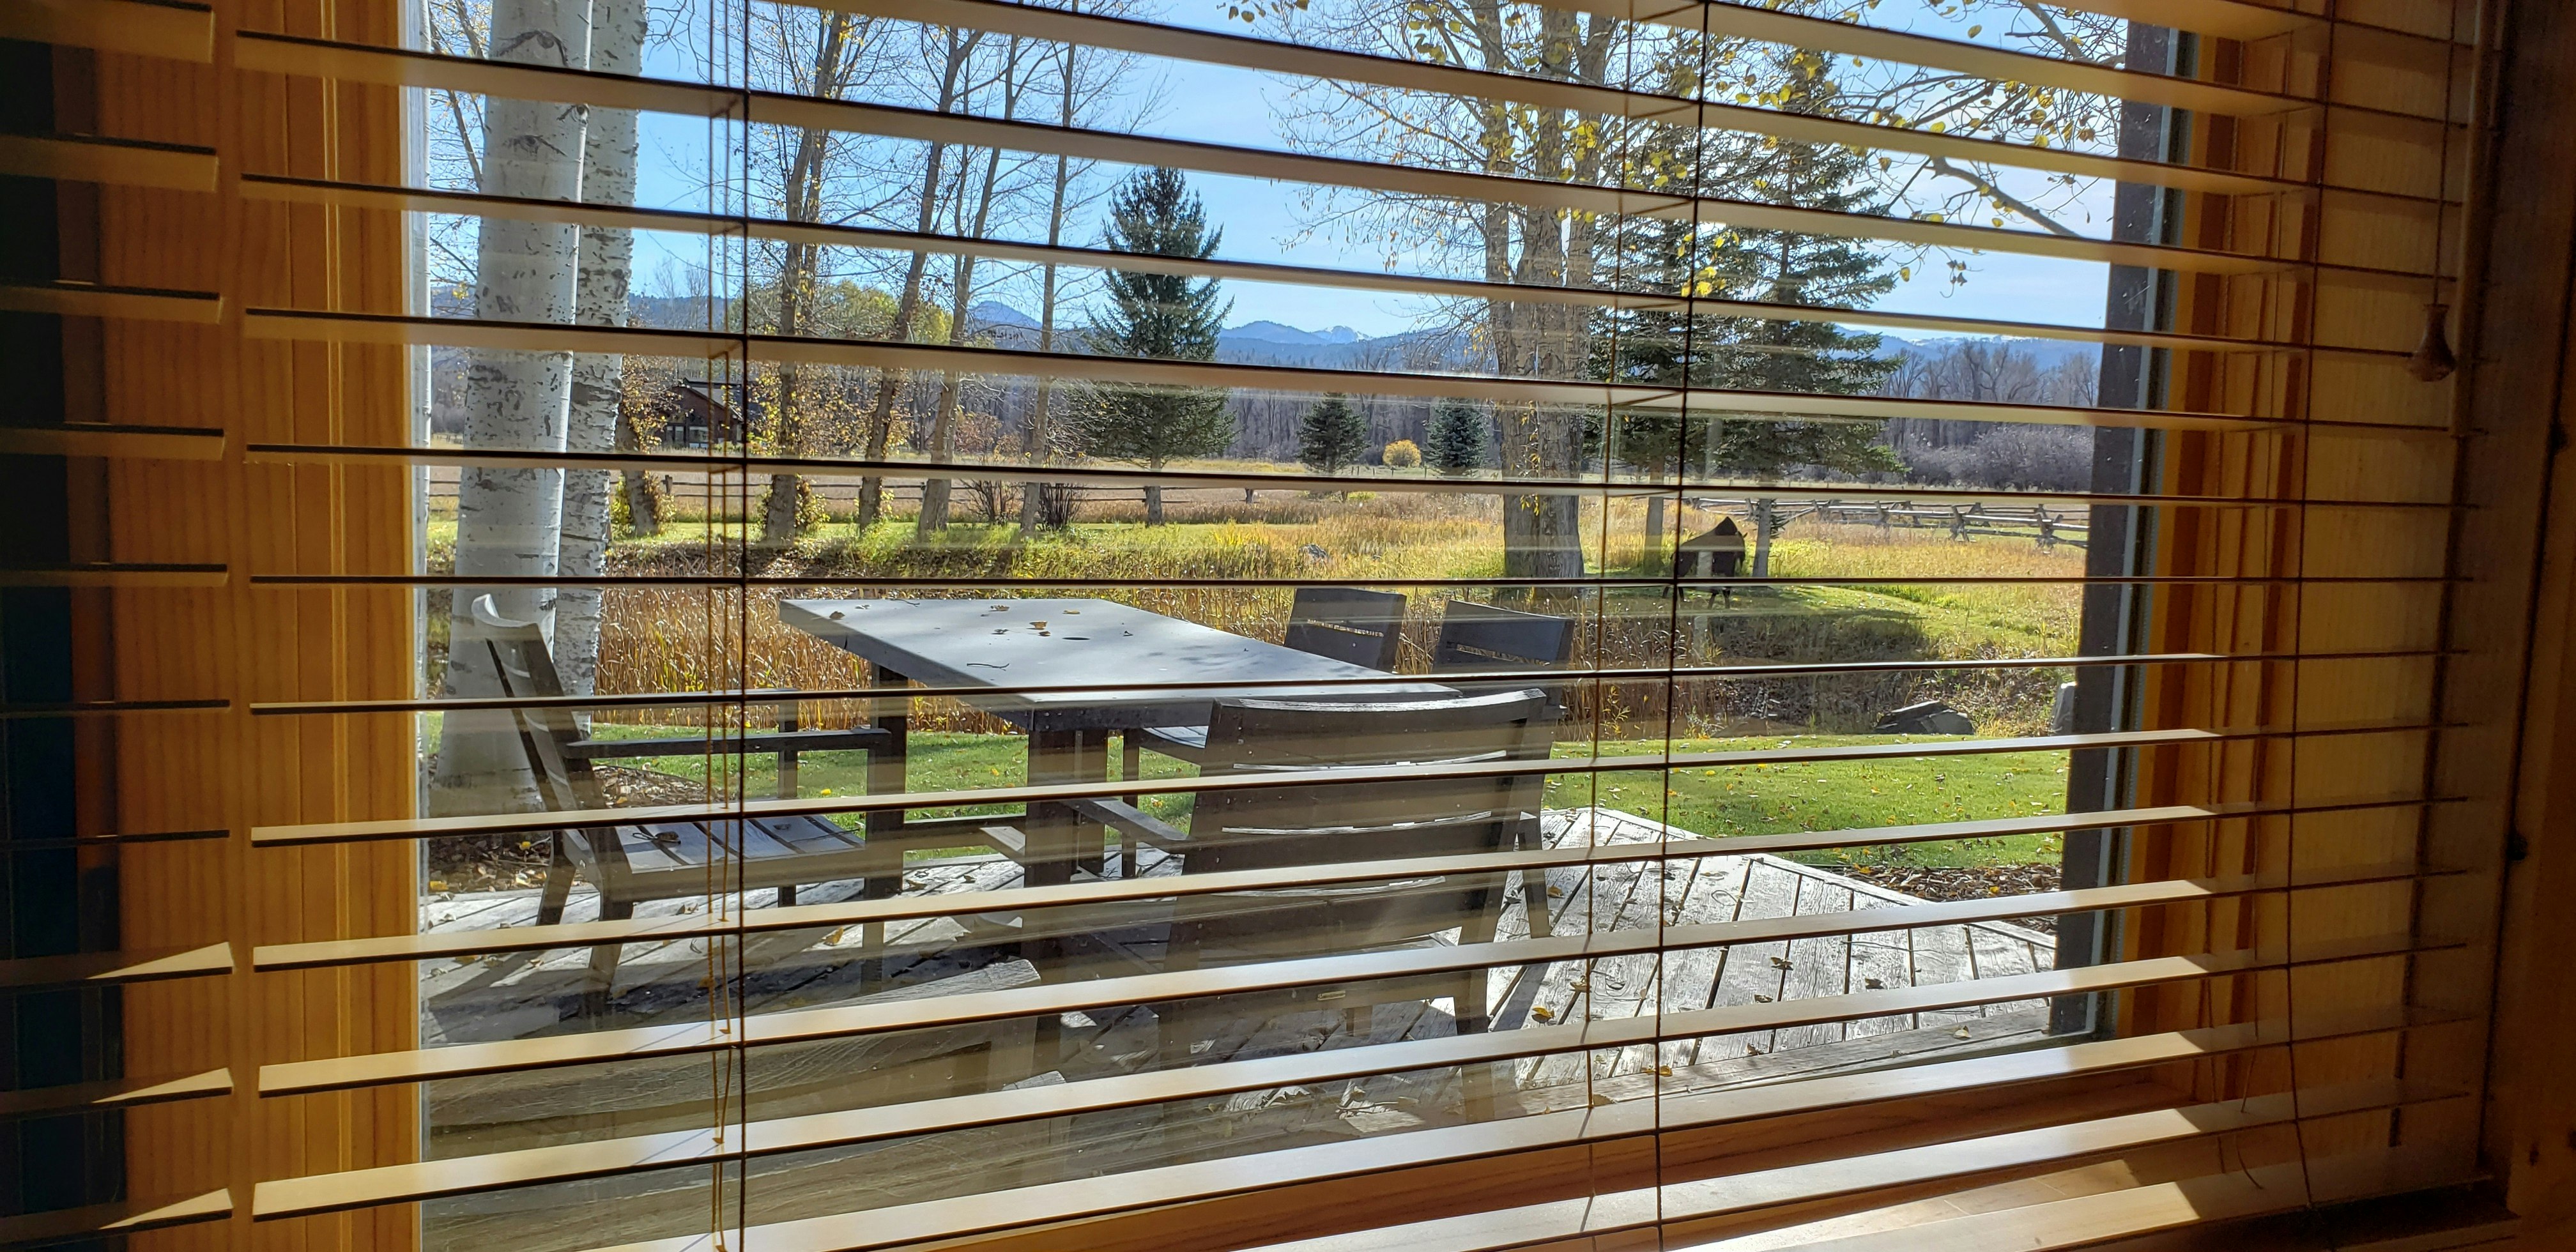 All of the windows at Western Star Ranch cabins offer great views.